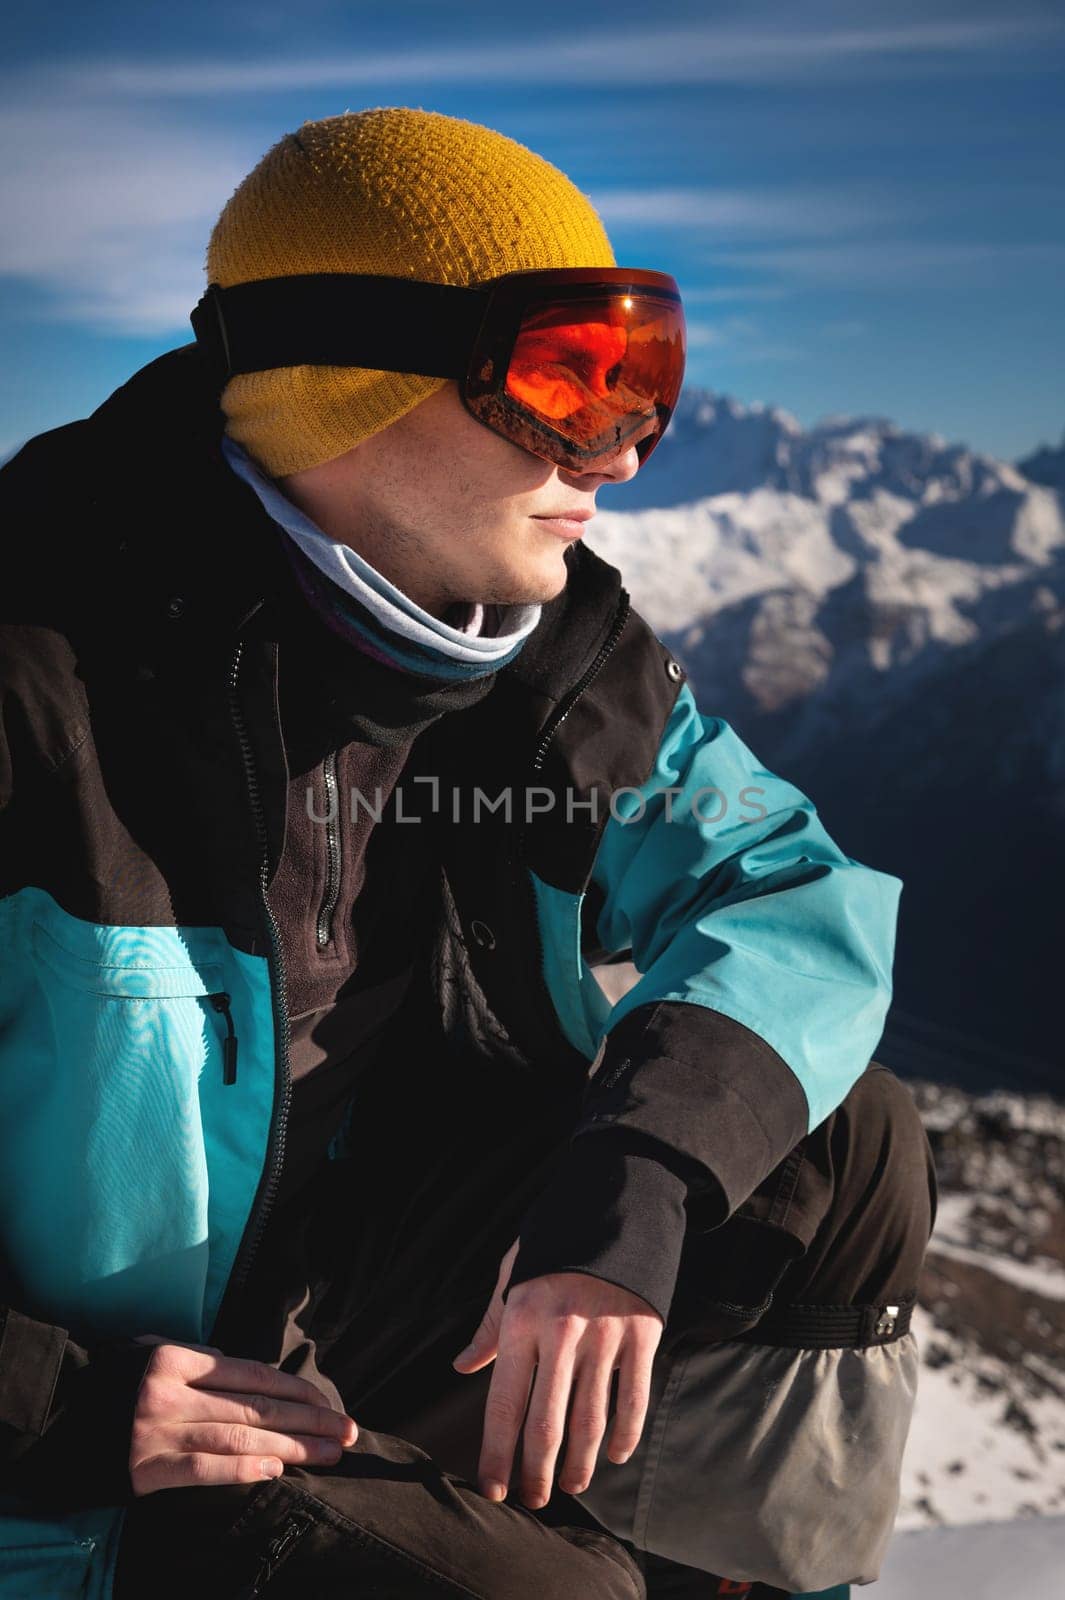 Ski Man sitting on top of a hill. Young man squatting in warm clothes on a sunny day in the snowy mountains.